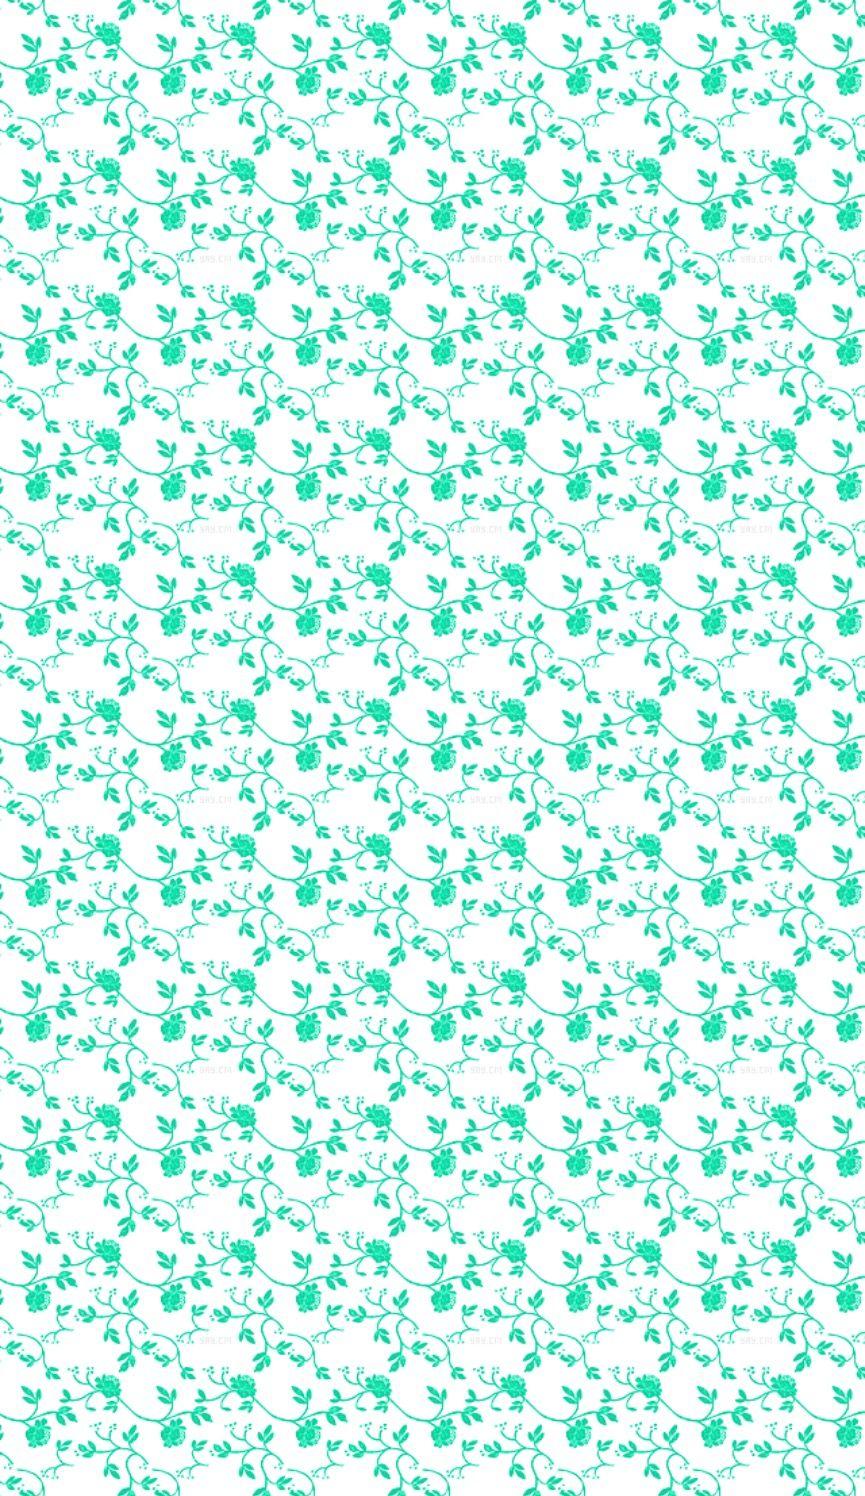 Patterns Background Wallpaper Image Teal And White Floral